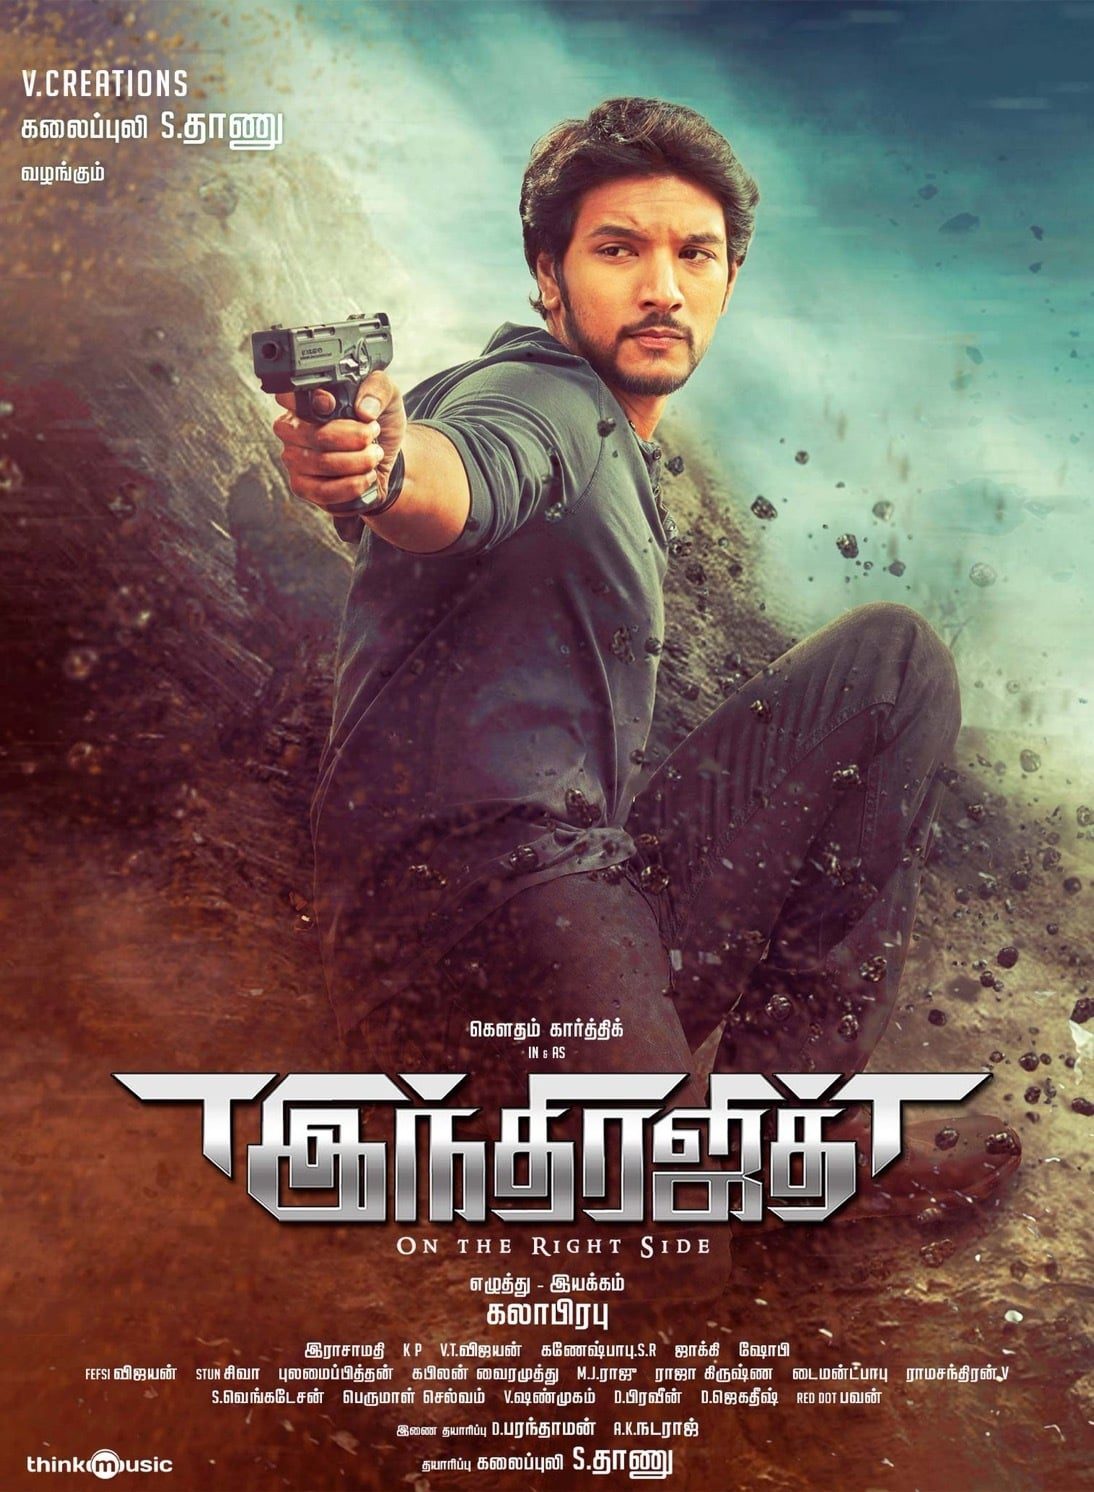 Poster for the movie "Indrajith"